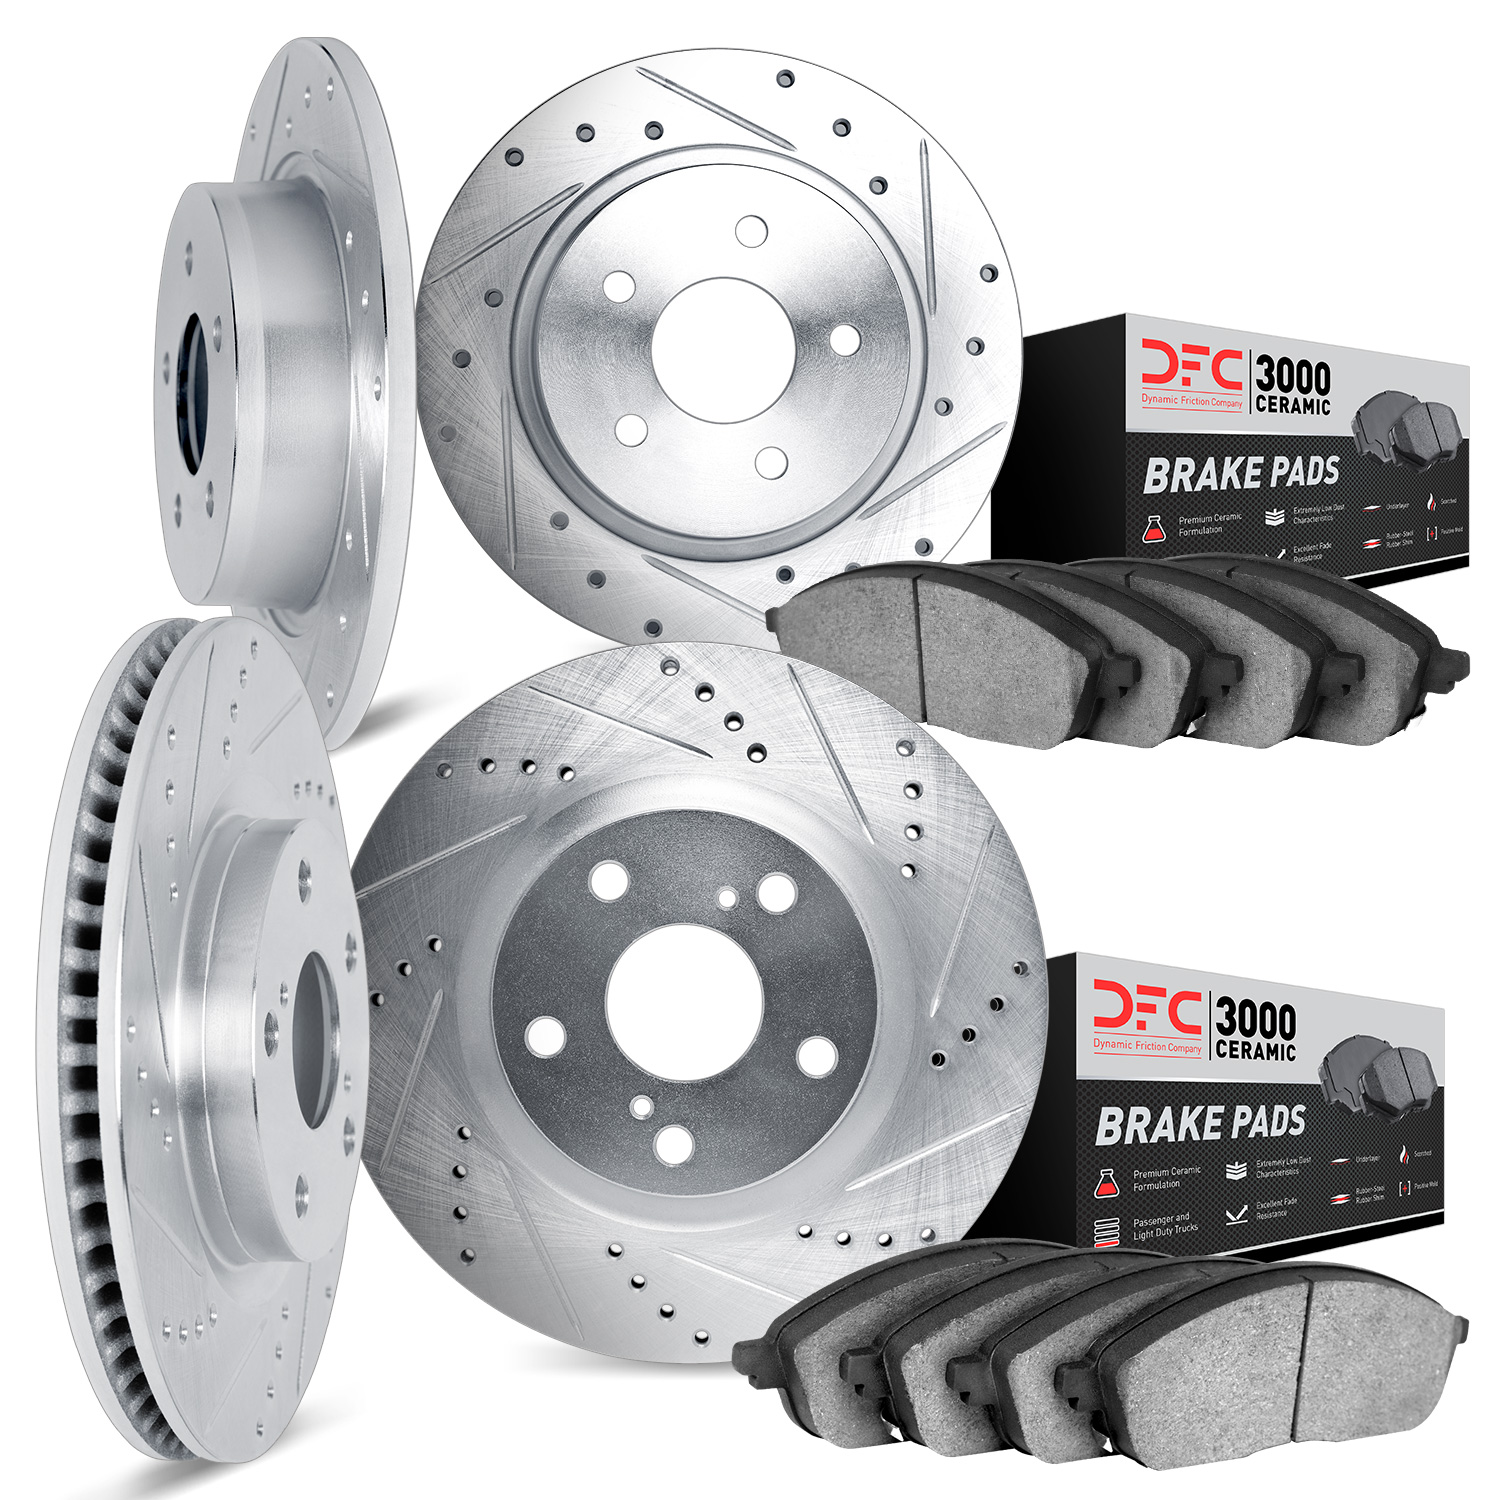 7304-80042 Drilled/Slotted Brake Rotor with 3000-Series Ceramic Brake Pads Kit [Silver], 2014-2016 Ford/Lincoln/Mercury/Mazda, P